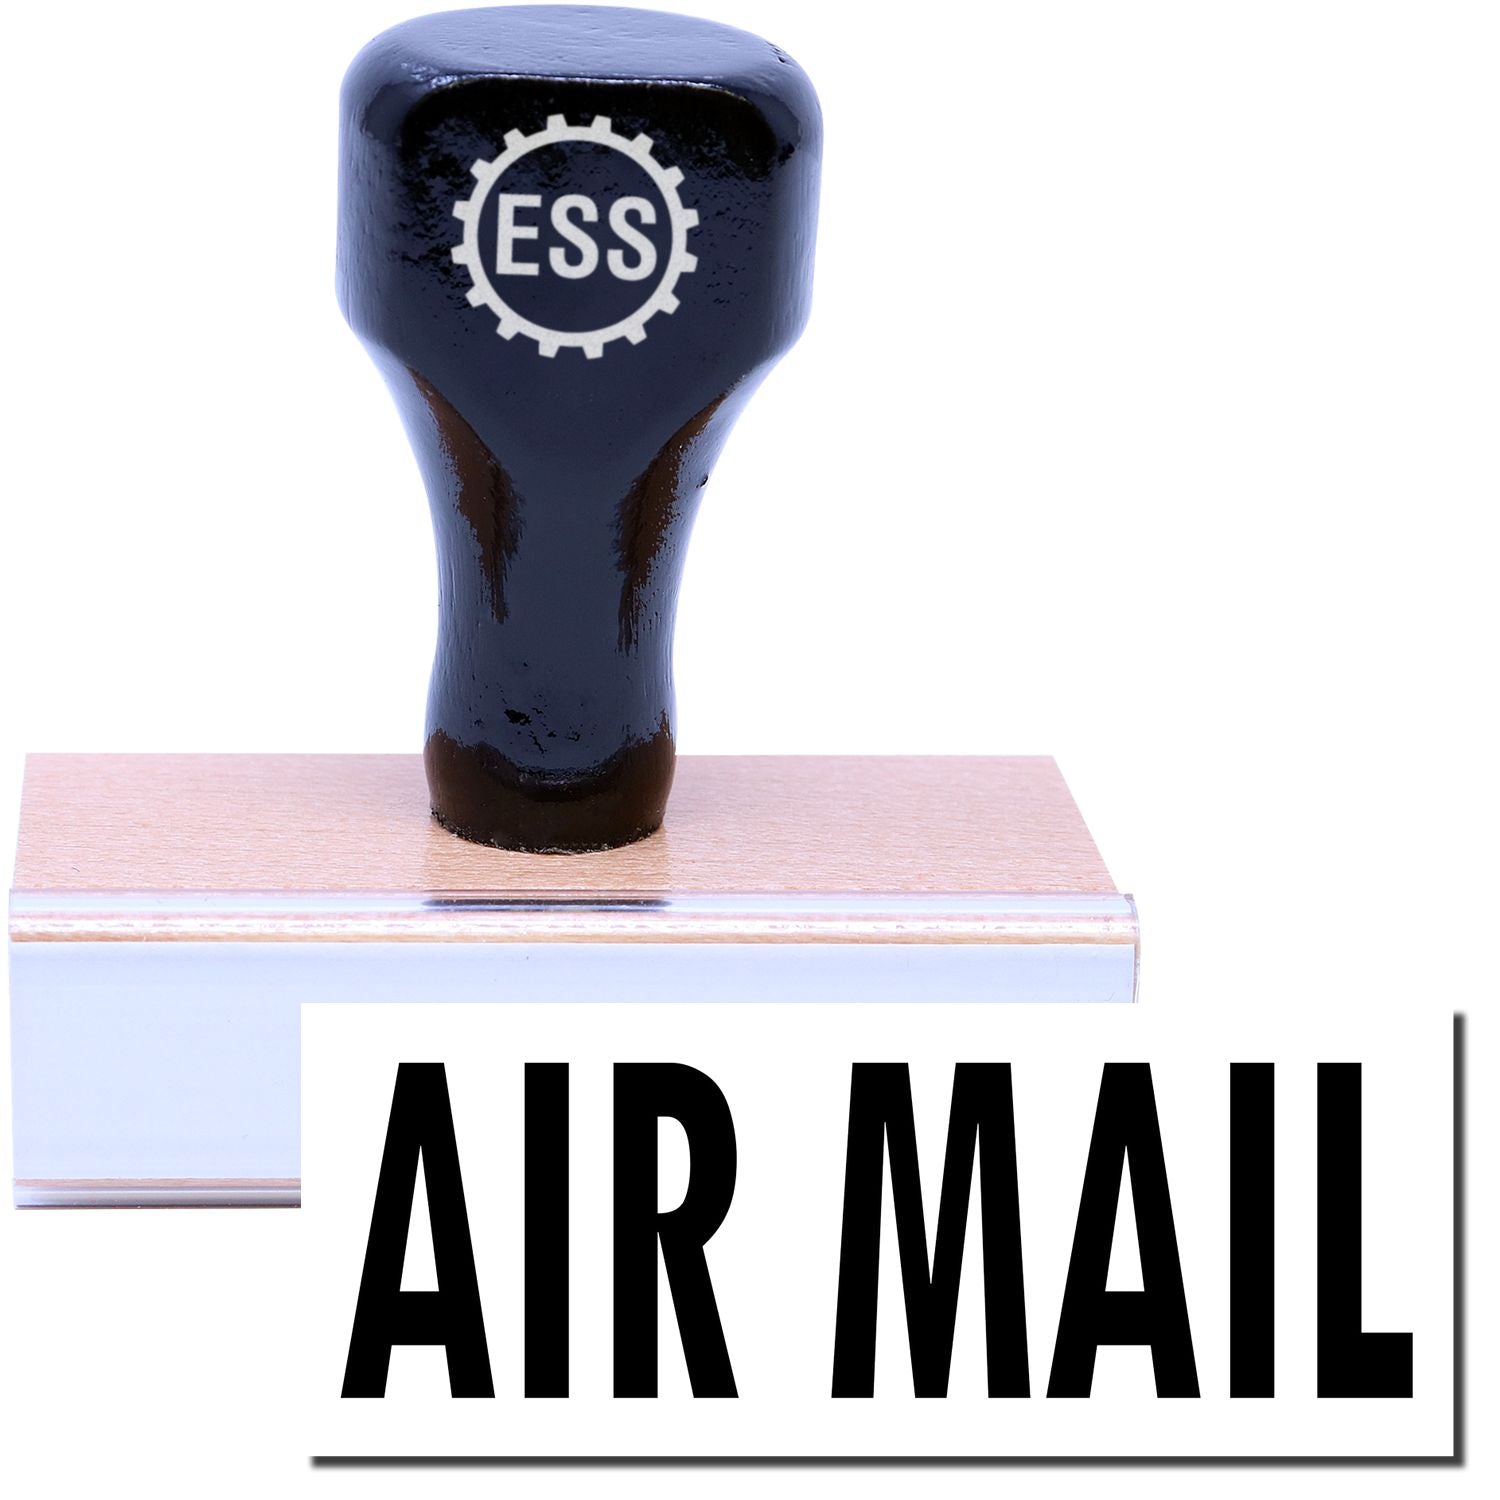 A stock office rubber stamp with a stamped image showing how the text "AIR MAIL" in a large font is displayed after stamping.